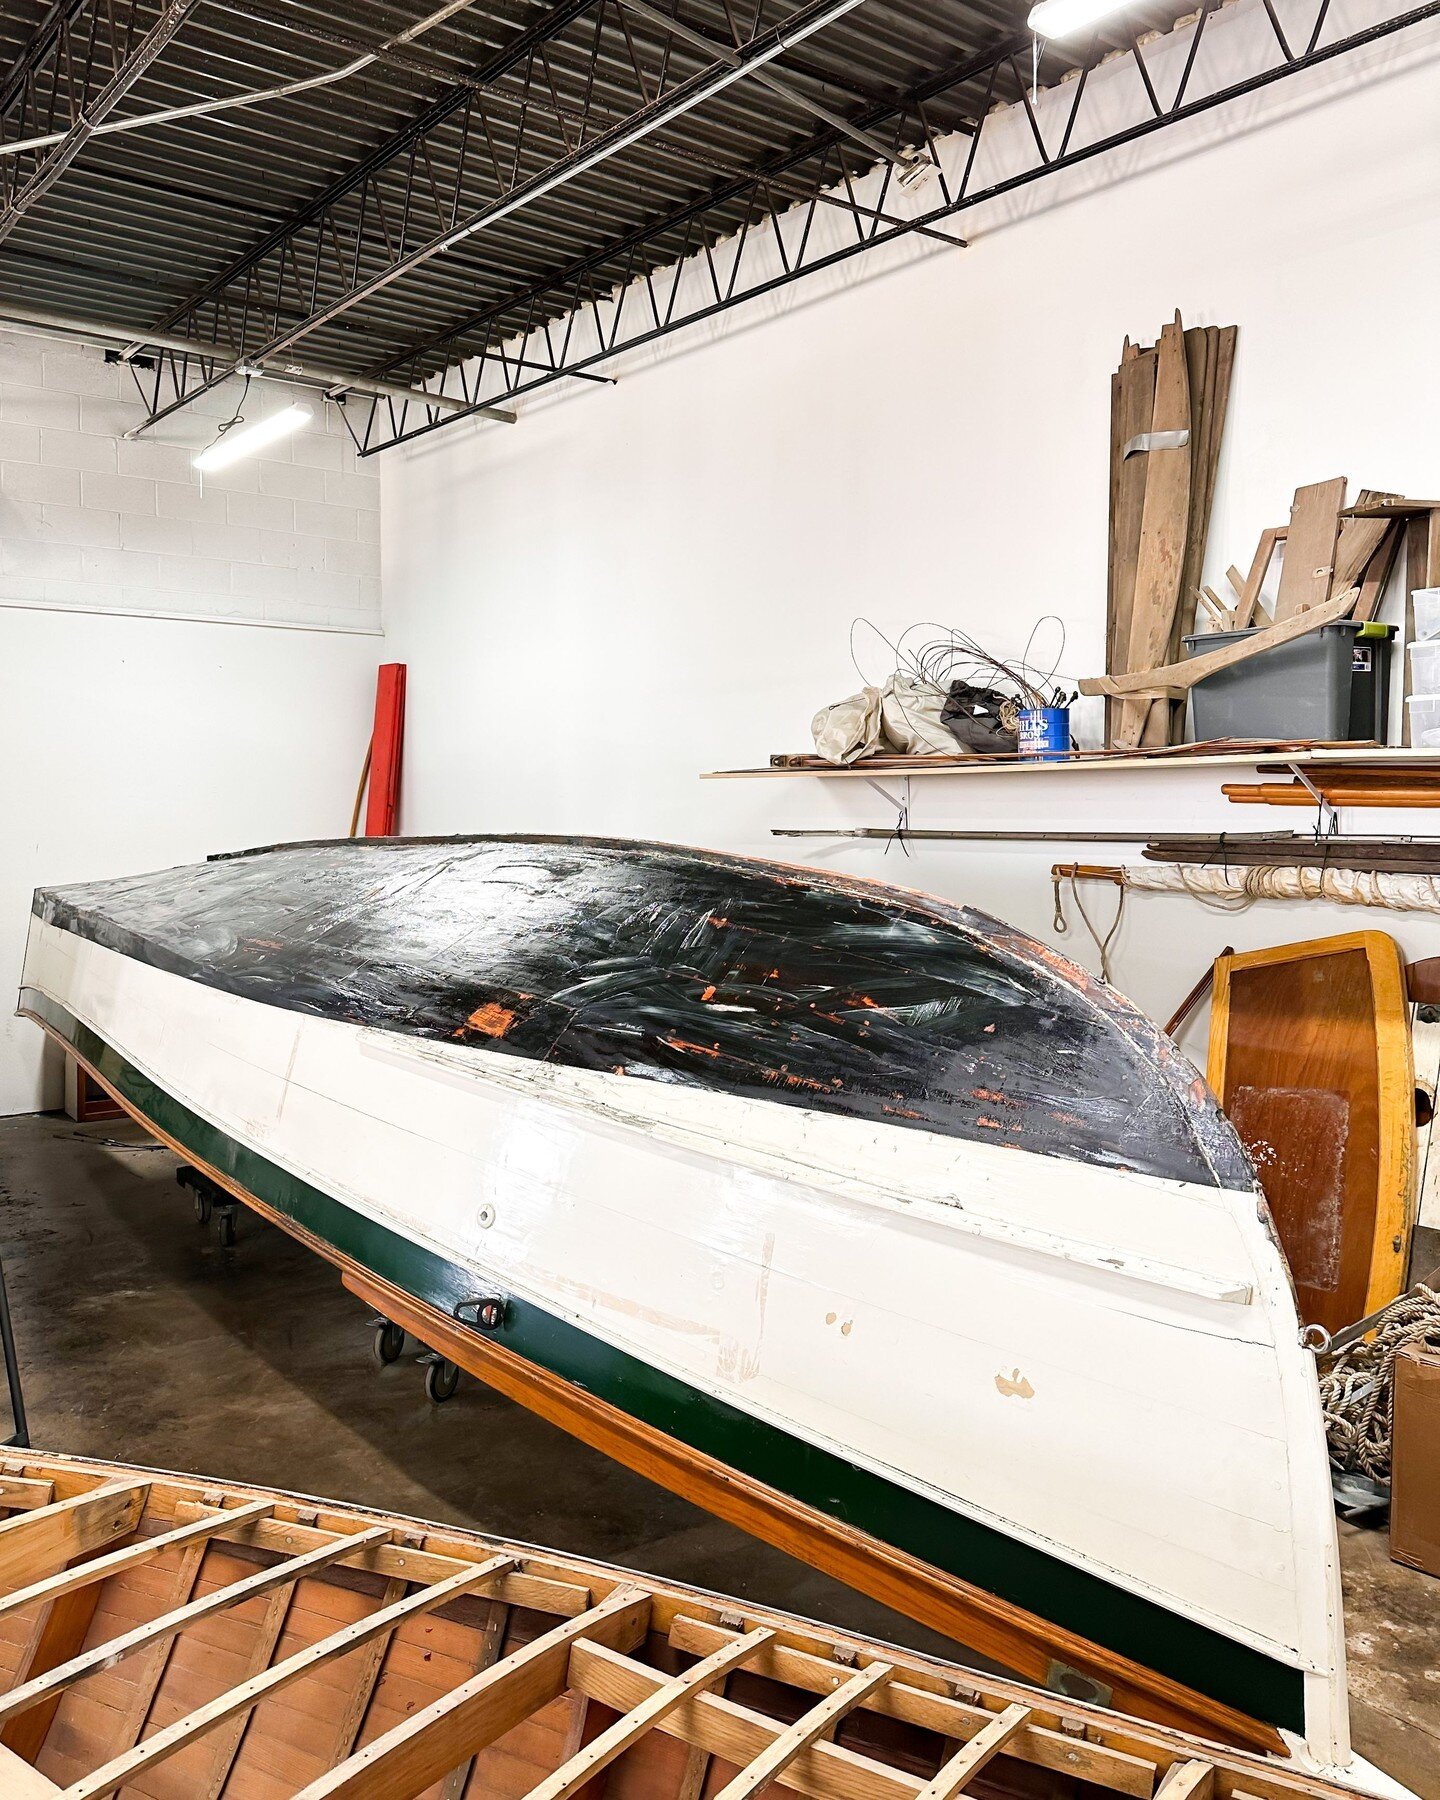 Before | After

It's amazing what a single coat of @totalboat Total Strip can do to the bottom of a boat. Now just look at all that lead primer to deal with!

 #woodworking, #woodshop, #boating, #atthelake, #boating, #woodenboat, #woodenboatbuilding,